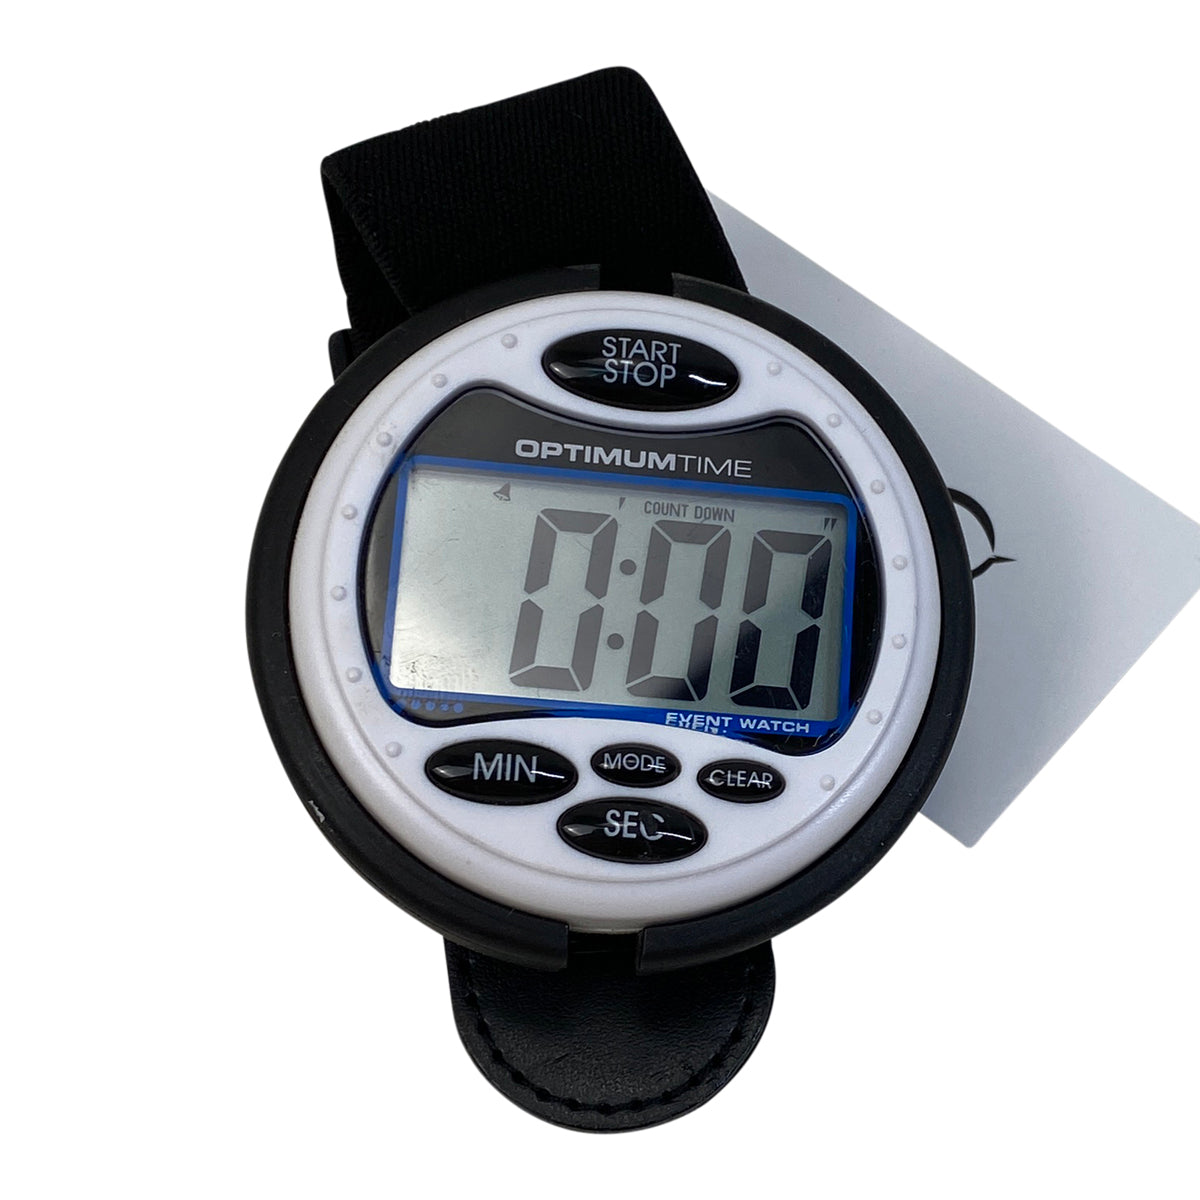 The Optimum Time Eventing Watch in White